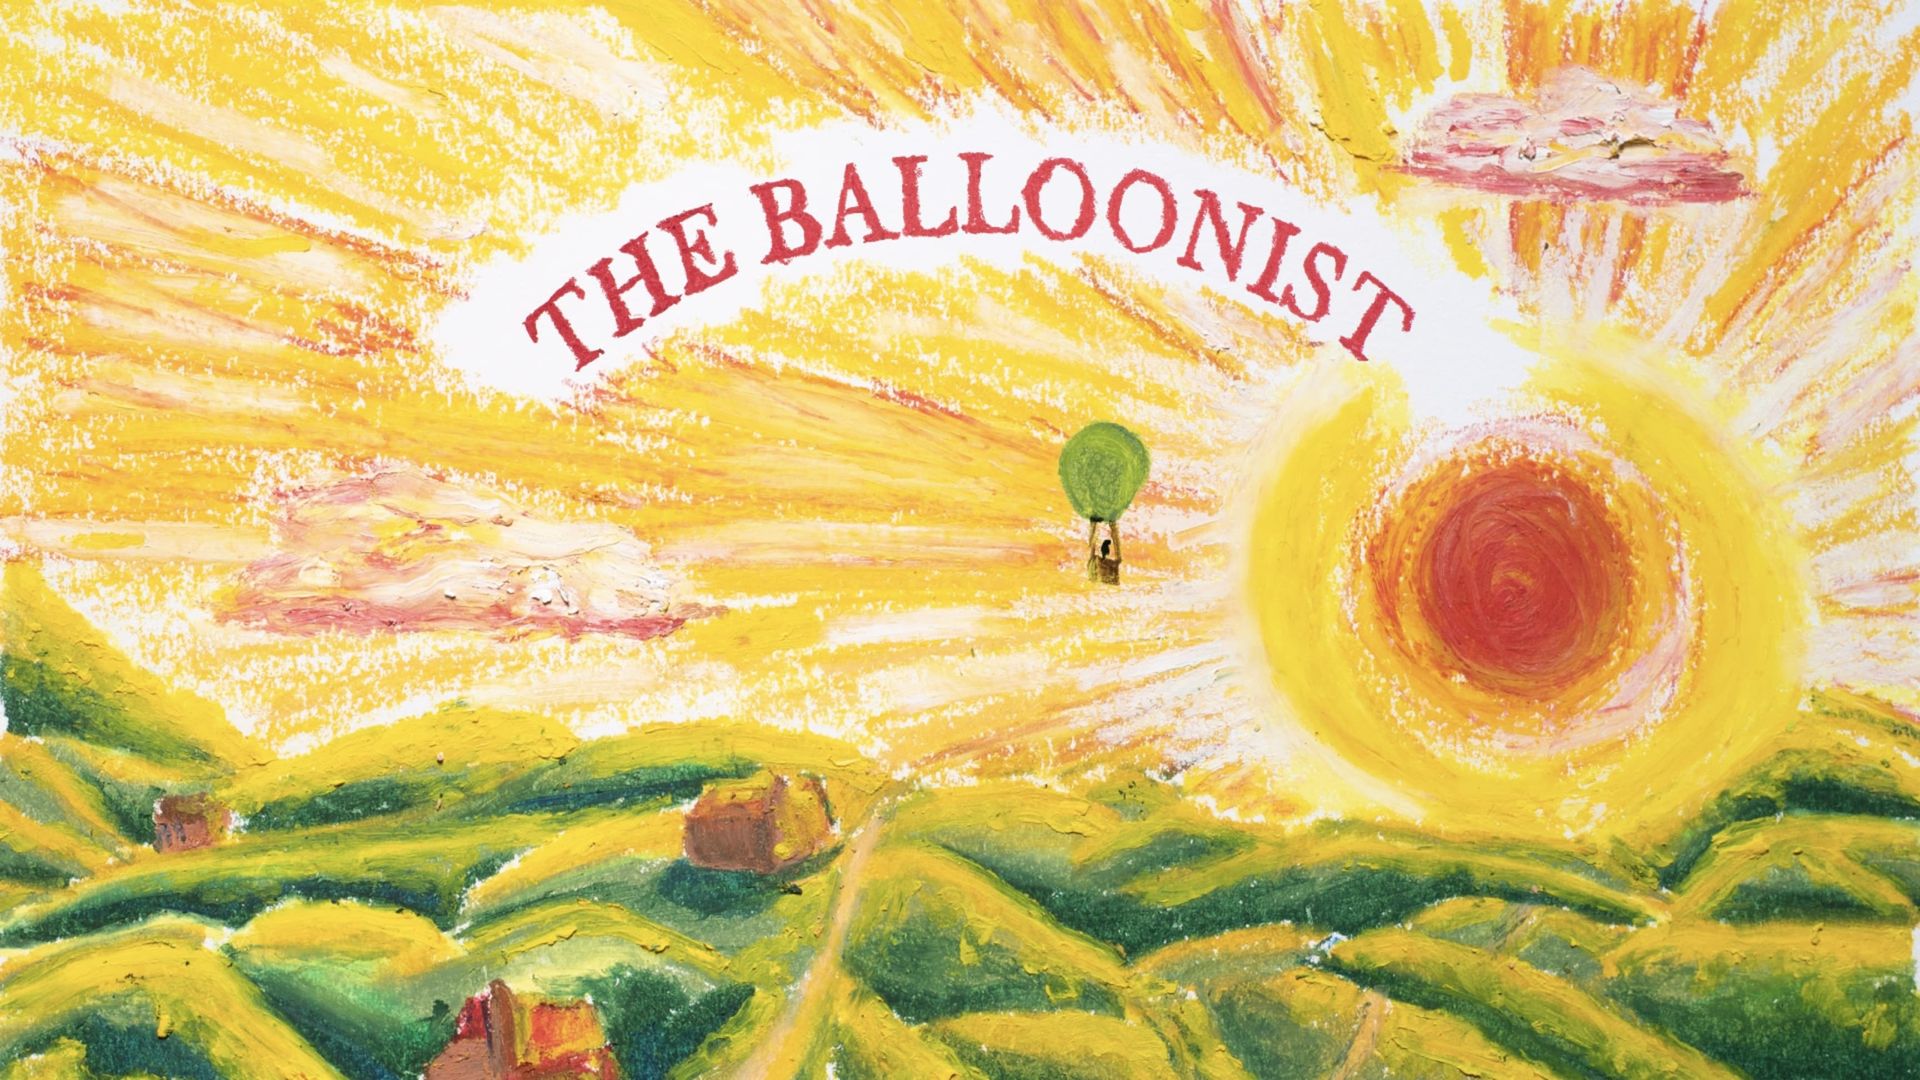 The Balloonist background